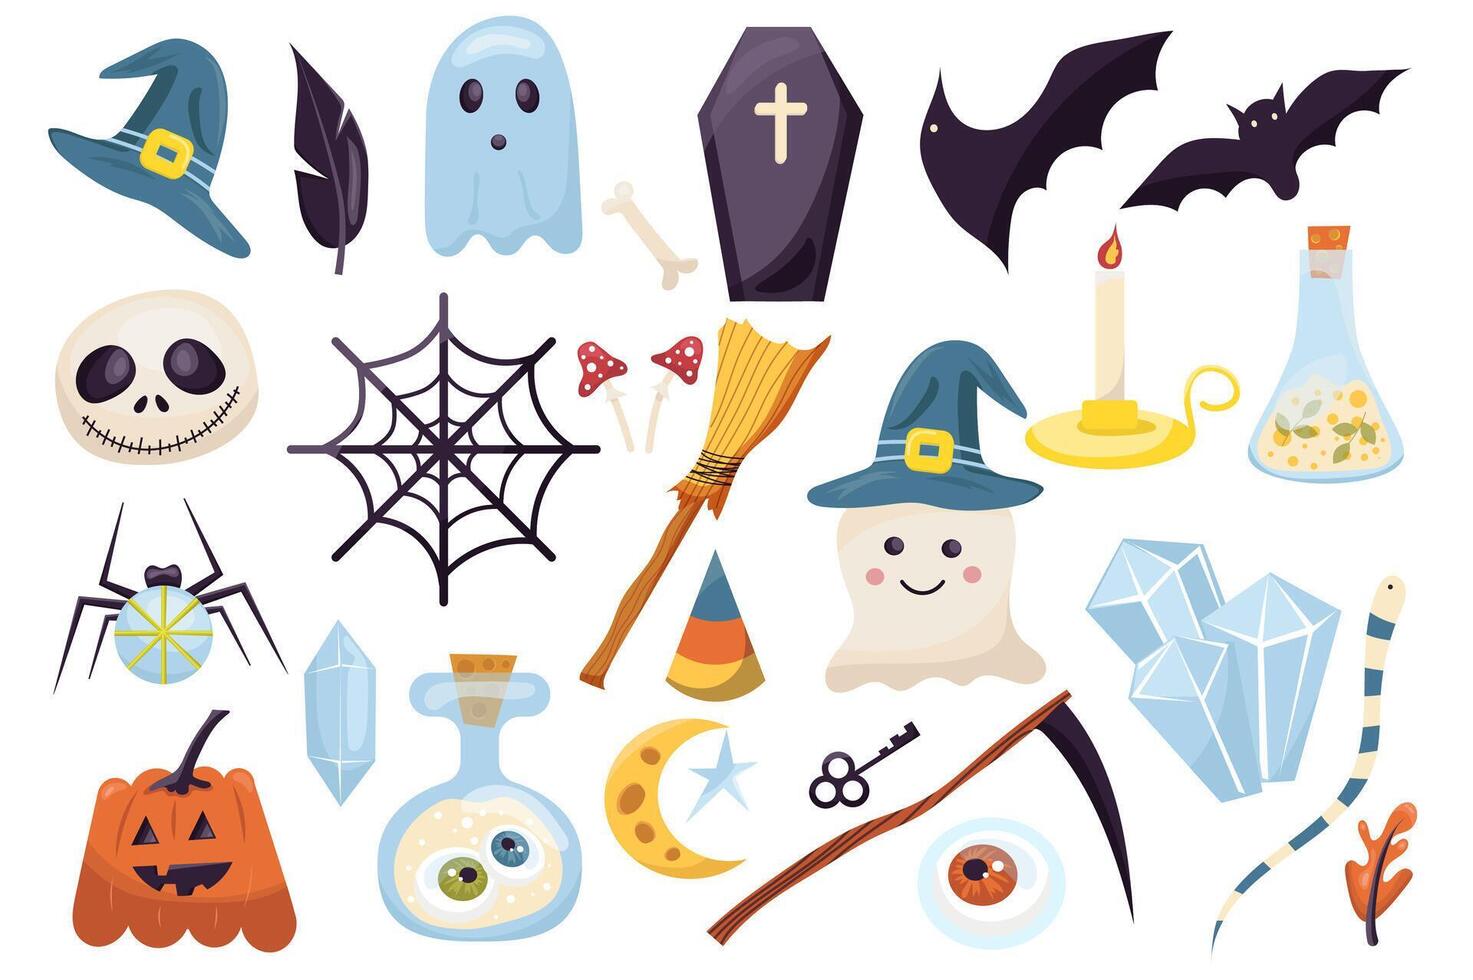 Halloween mega set in graphic flat design. Bundle elements of witch cap, raven feather, ghost, coffin, bat, pumpkin, fly agaric, broom, candle, potion and other. Vector illustration isolated stickers